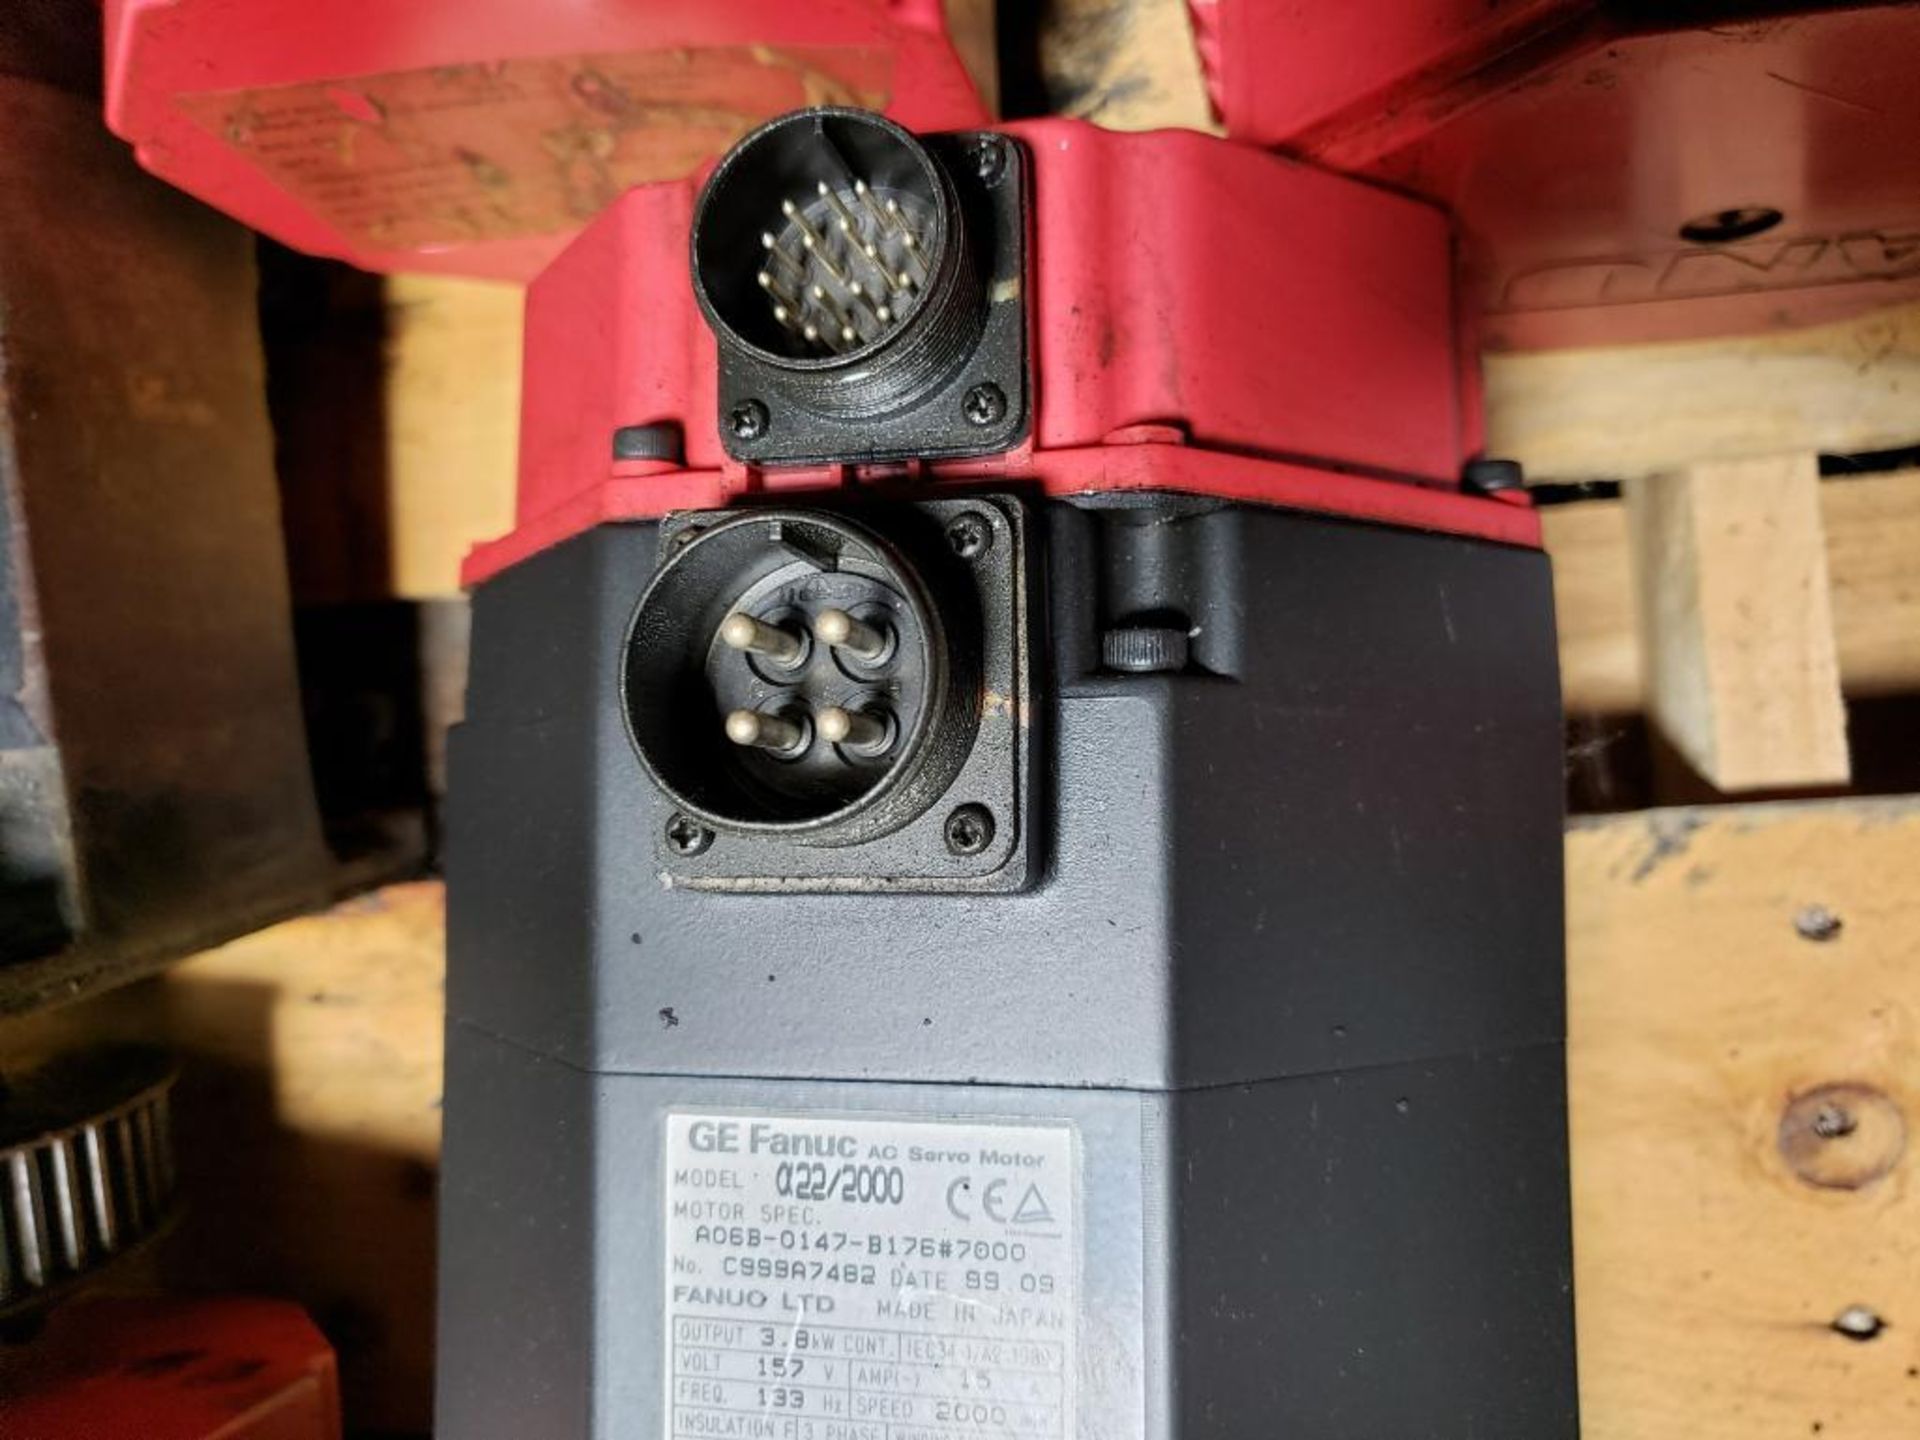 3.8kW GE Fanuc AC servo motor. A06B-0147-B176. 157V, 15AMP, 133Hz, 2000RPM. - Image 2 of 3